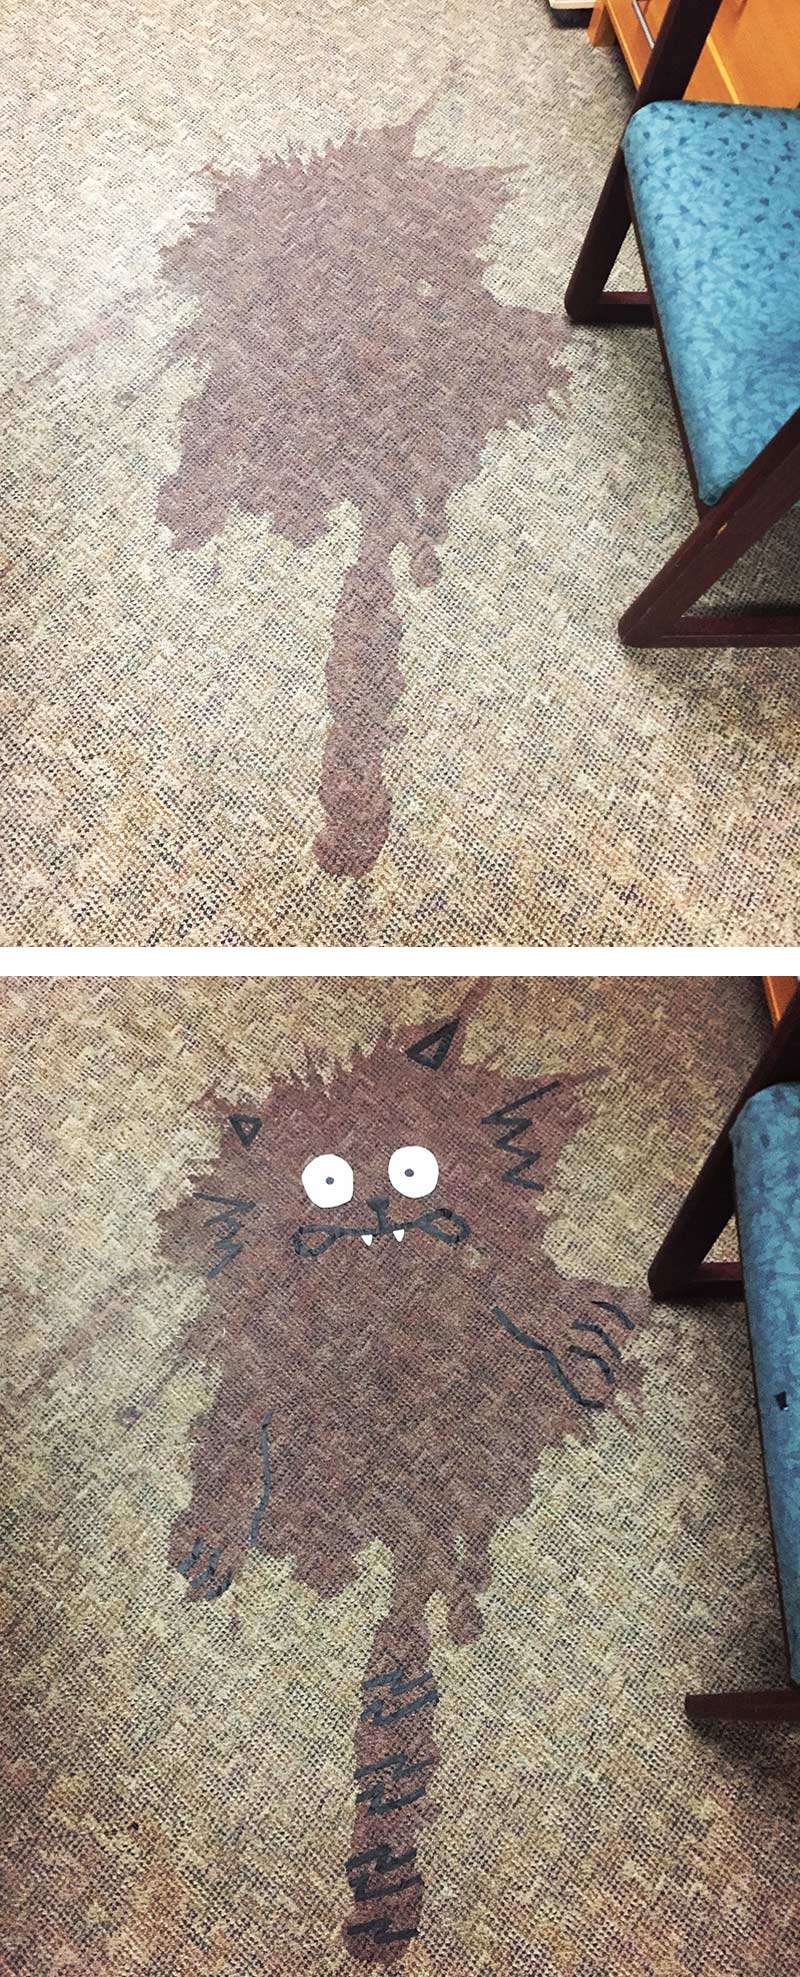 My coworker spilled wine in the office